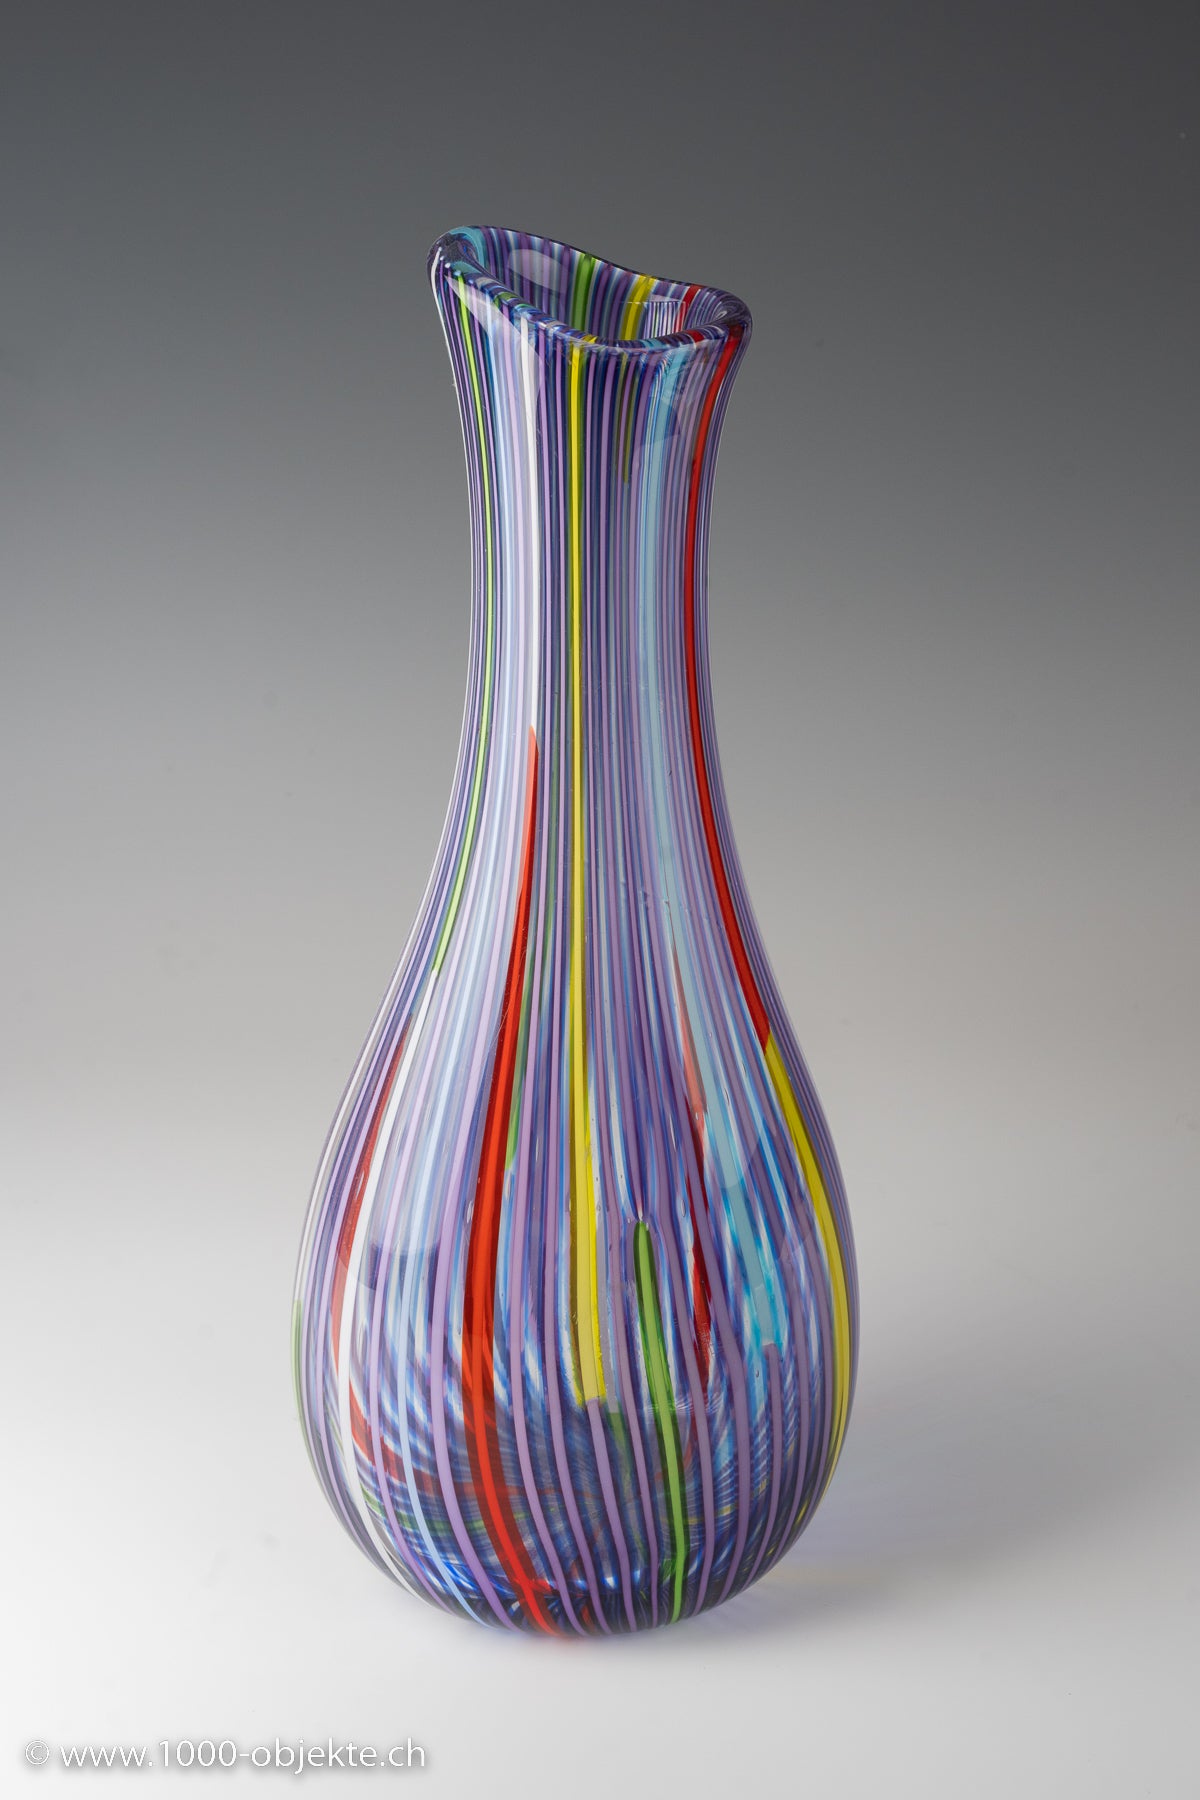 Anzolo Fuga, vase from 'Bandiere' series, 1955-1958